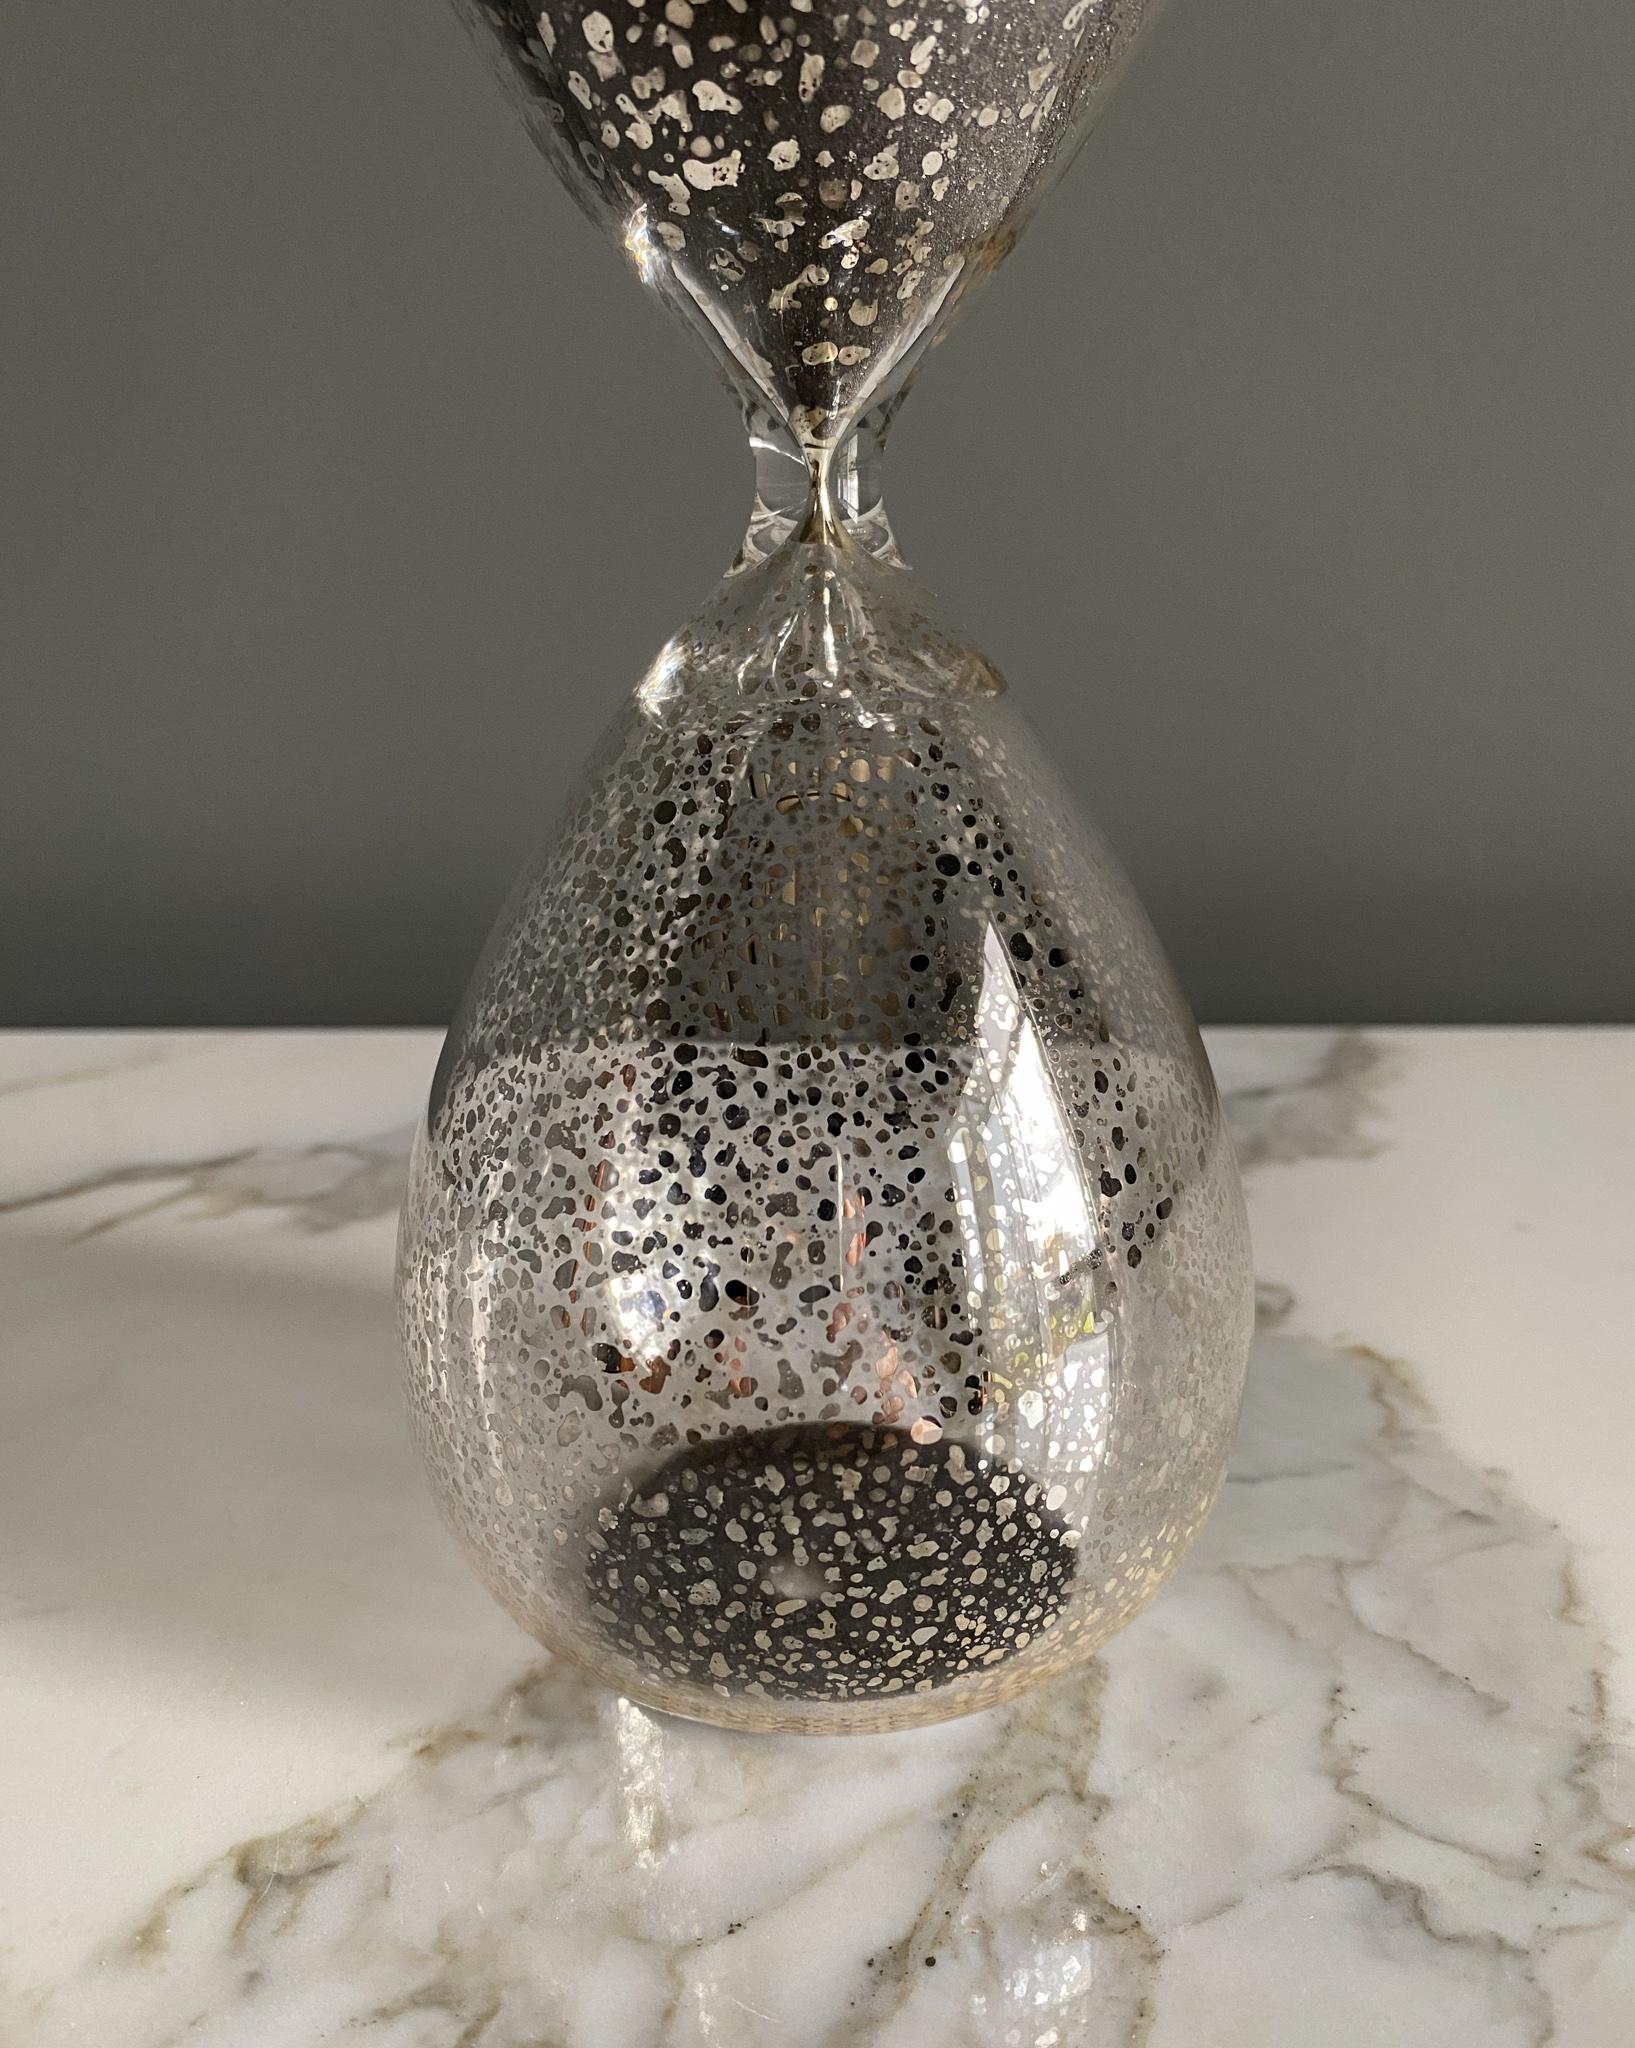 Unknown Modernist Hourglass, 1990's